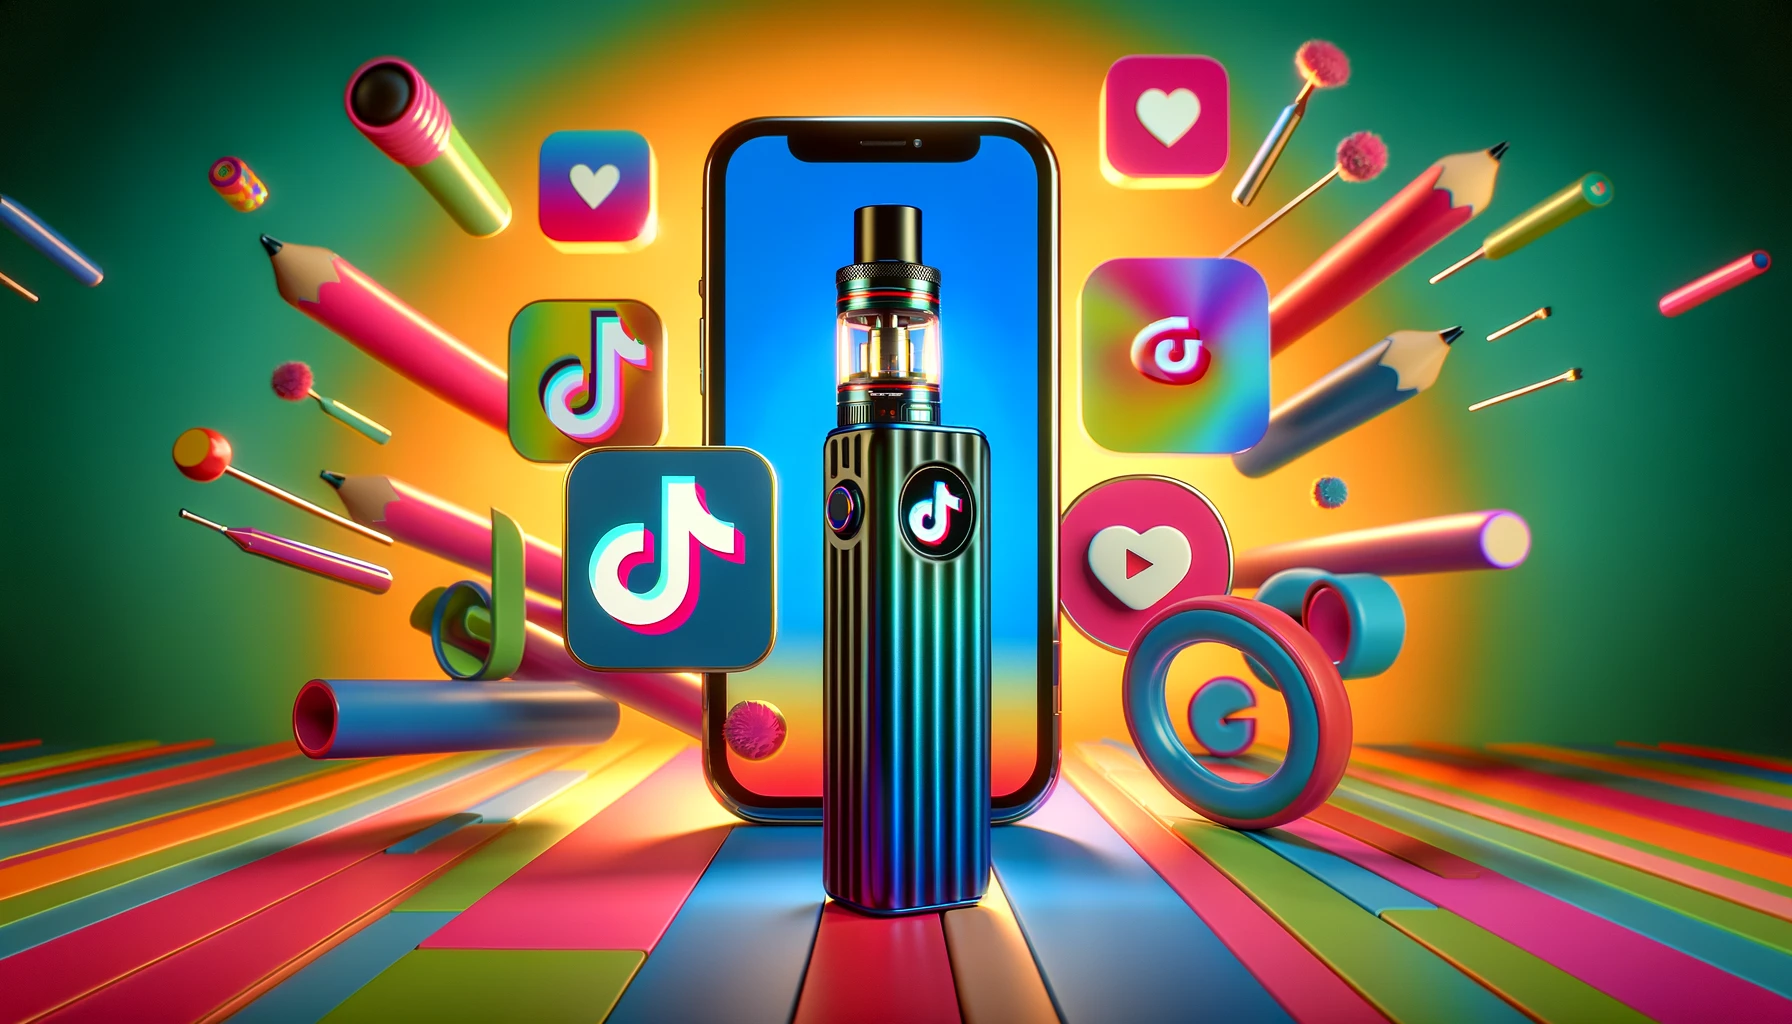 Under the pretence of stationery, vapes are being sold on TikTok Shop “to under 18s.”